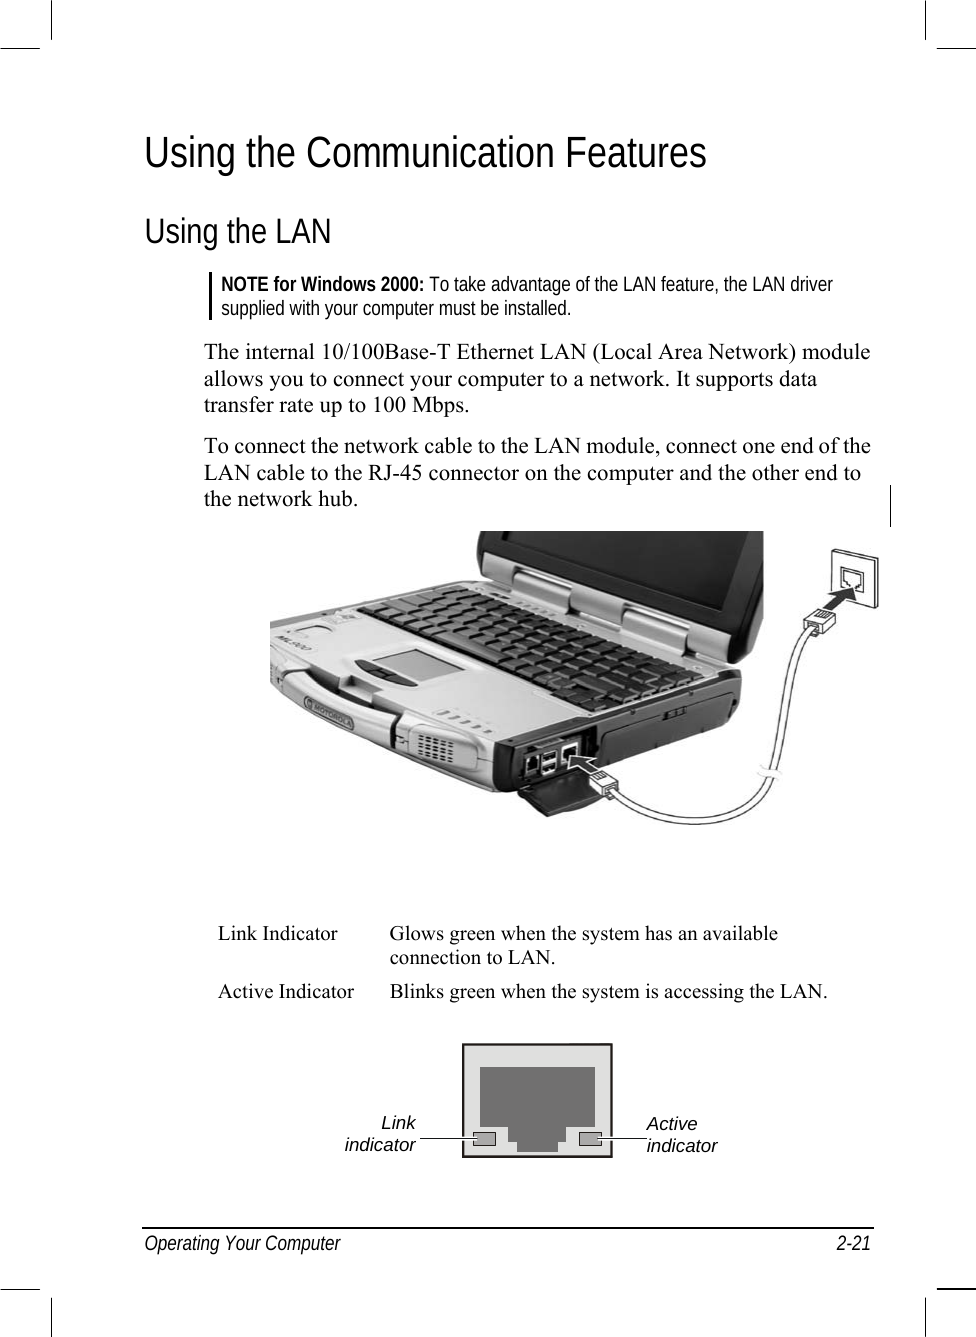  Operating Your Computer  2-21 Using the Communication Features Using the LAN NOTE for Windows 2000: To take advantage of the LAN feature, the LAN driver supplied with your computer must be installed.  The internal 10/100Base-T Ethernet LAN (Local Area Network) module allows you to connect your computer to a network. It supports data transfer rate up to 100 Mbps. To connect the network cable to the LAN module, connect one end of the LAN cable to the RJ-45 connector on the computer and the other end to the network hub.          Link Indicator  Glows green when the system has an available connection to LAN. Active Indicator  Blinks green when the system is accessing the LAN.  Active indicator Linkindicator